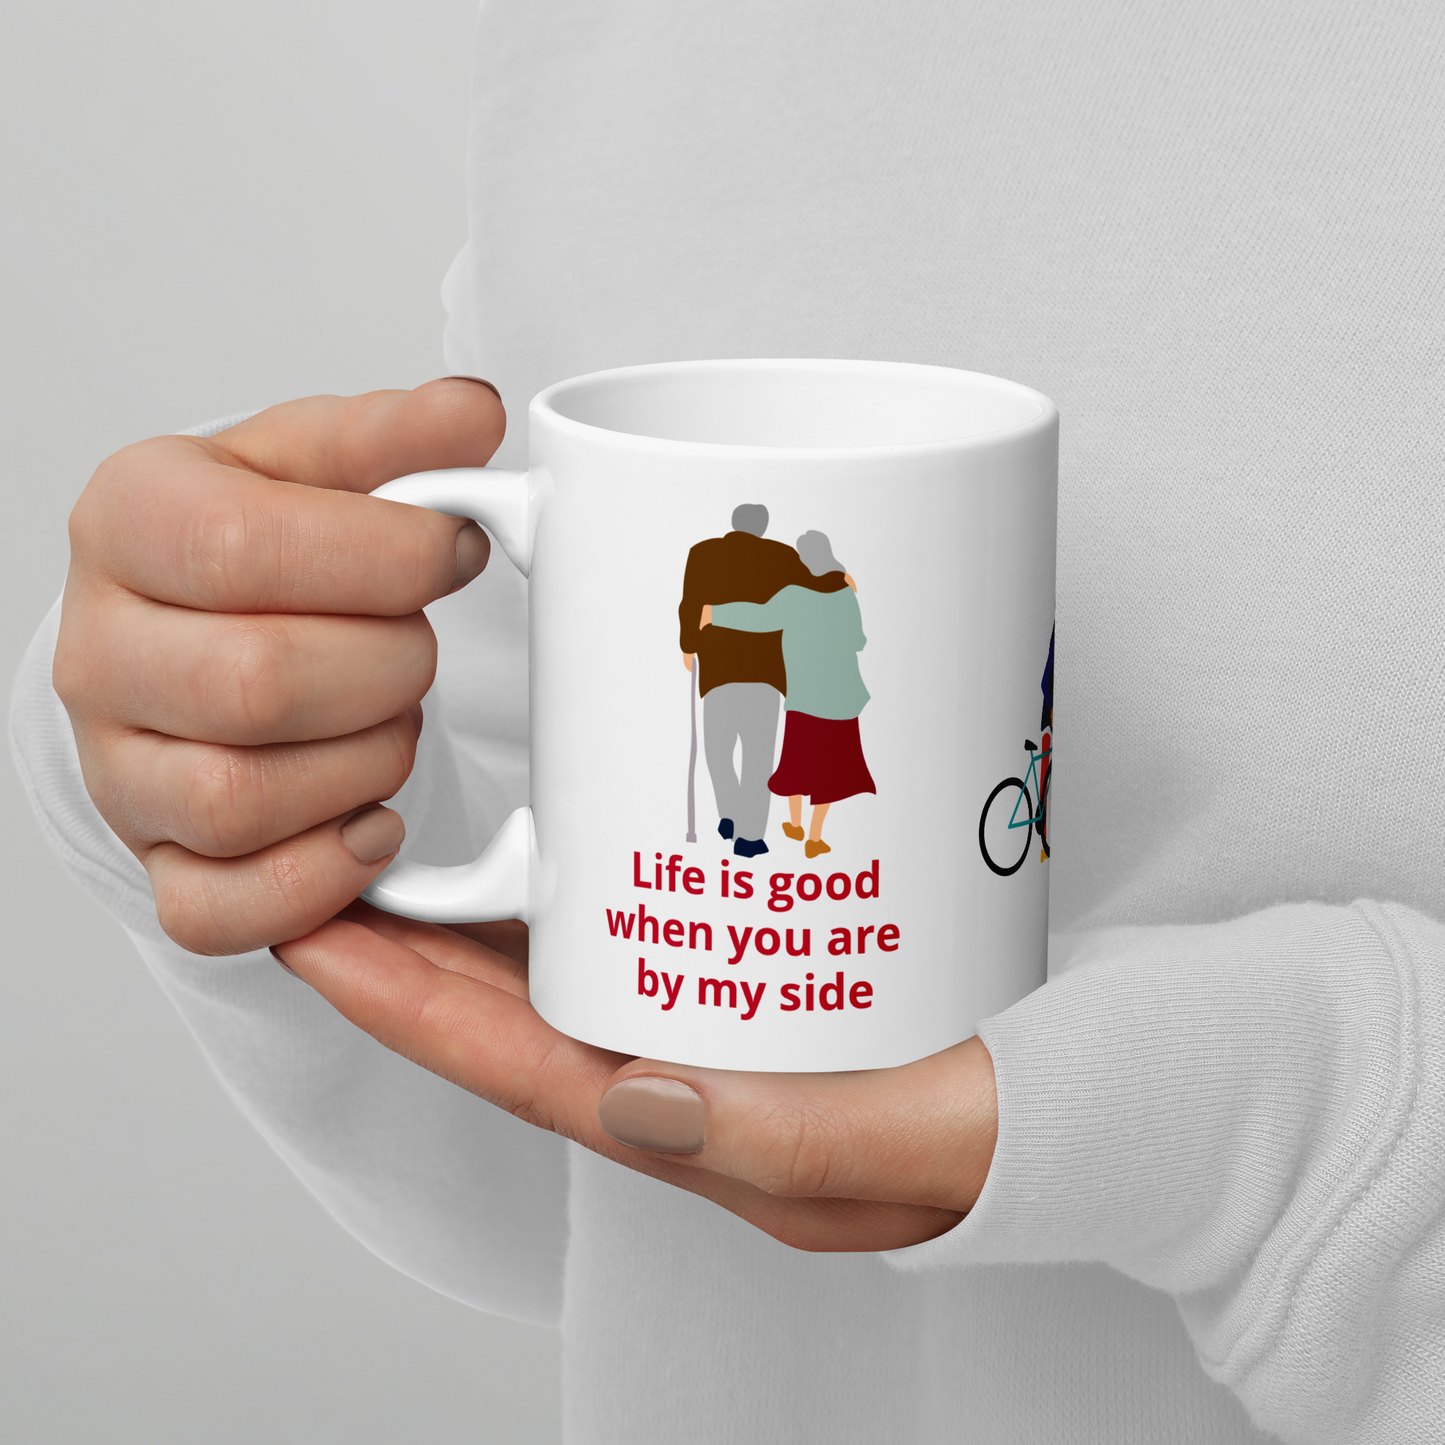 A perfect gift for lifetime - With personalised any text any picture -Mugs for couple, friends , Anniversary Gift with custom message